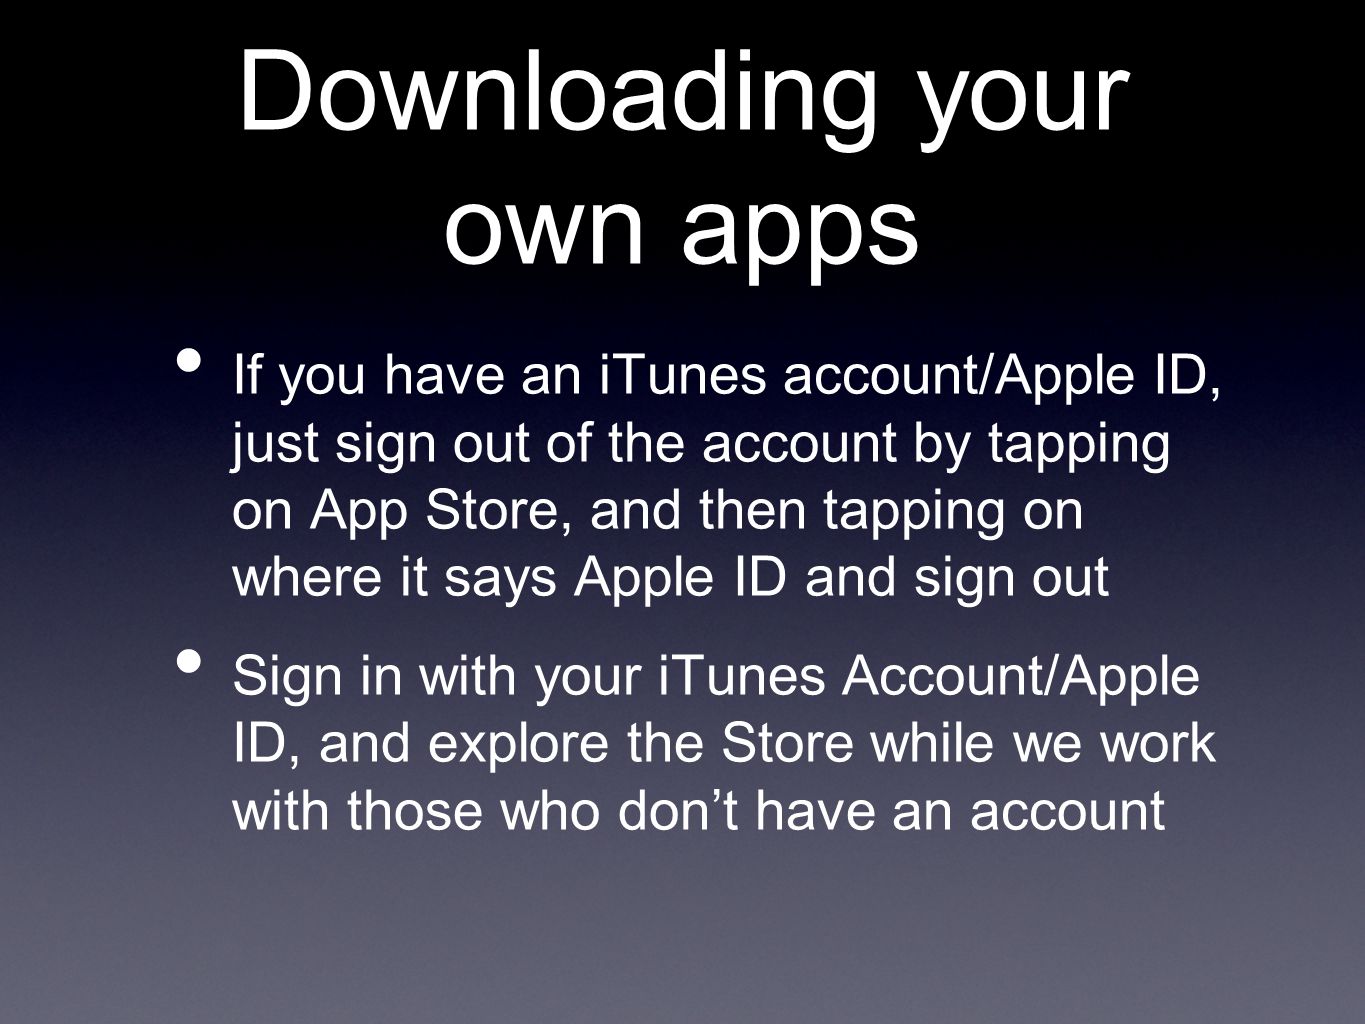 Downloading your own apps If you have an iTunes account/Apple ID, just sign out of the account by tapping on App Store, and then tapping on where it says Apple ID and sign out Sign in with your iTunes Account/Apple ID, and explore the Store while we work with those who don’t have an account